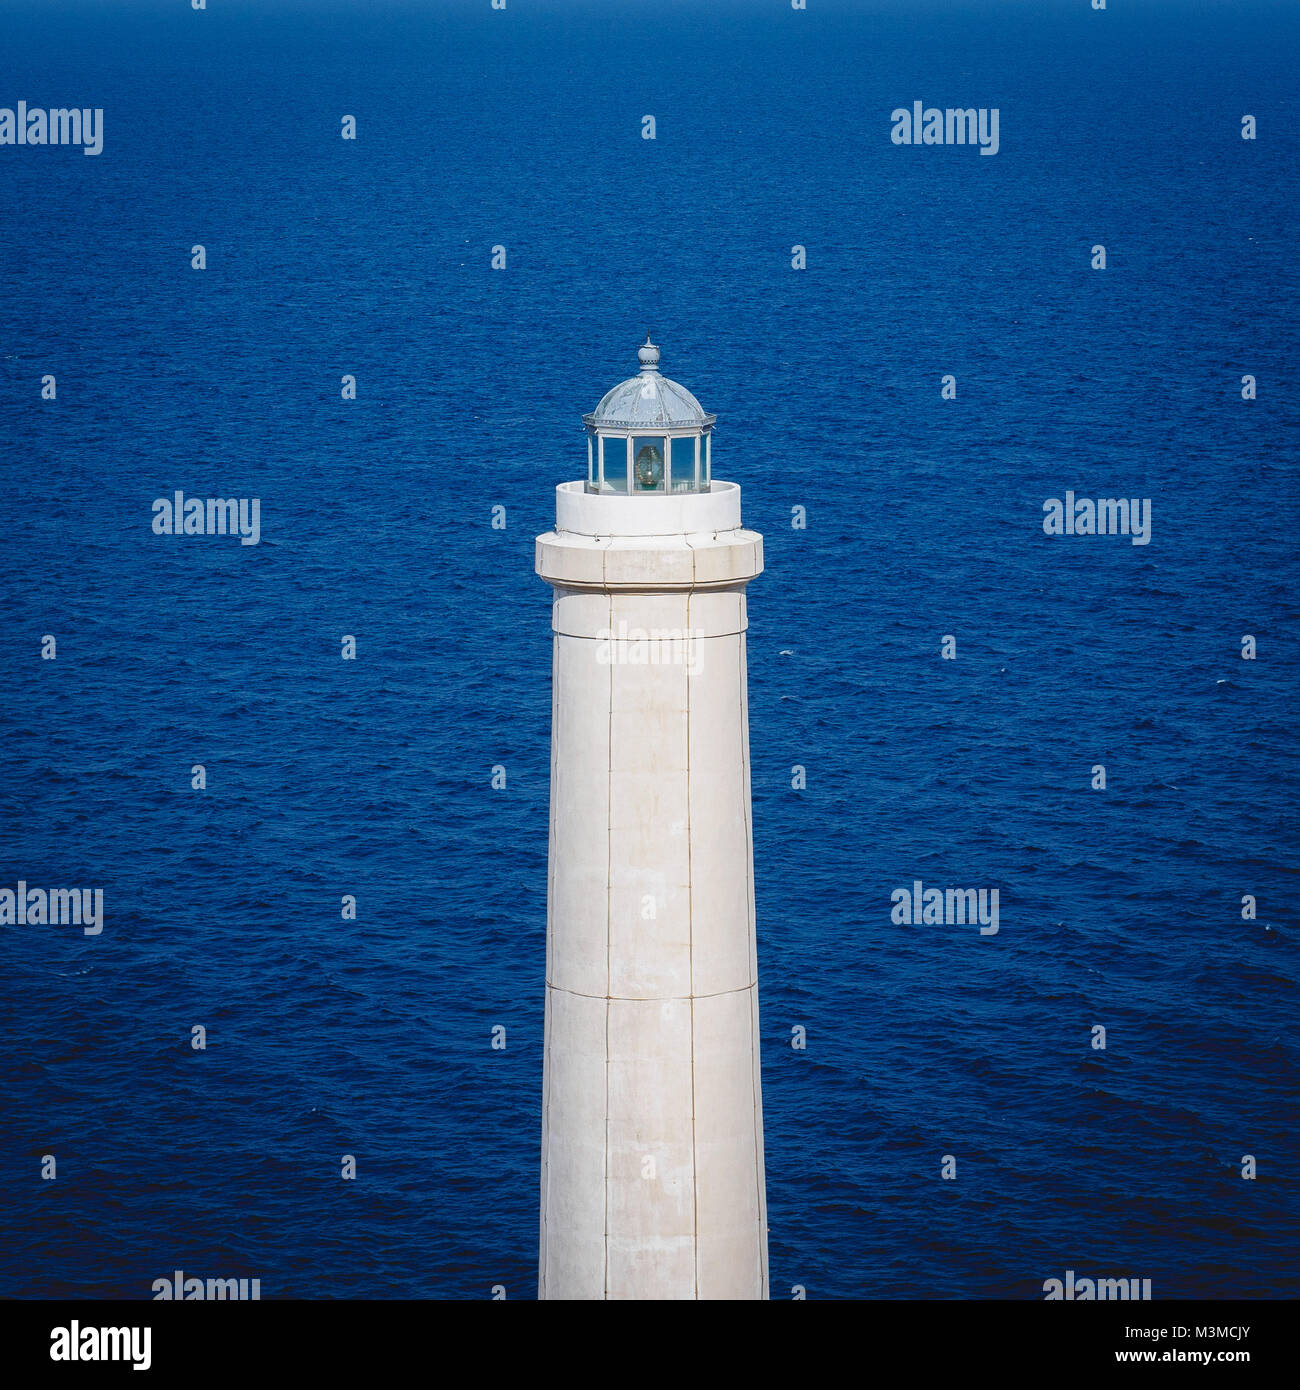 Otranto (Italy), August 2017. The lighthouse at Cape Palascia, near the Apulian town of Otranto, Italy's most easterly point. Square format. Stock Photo